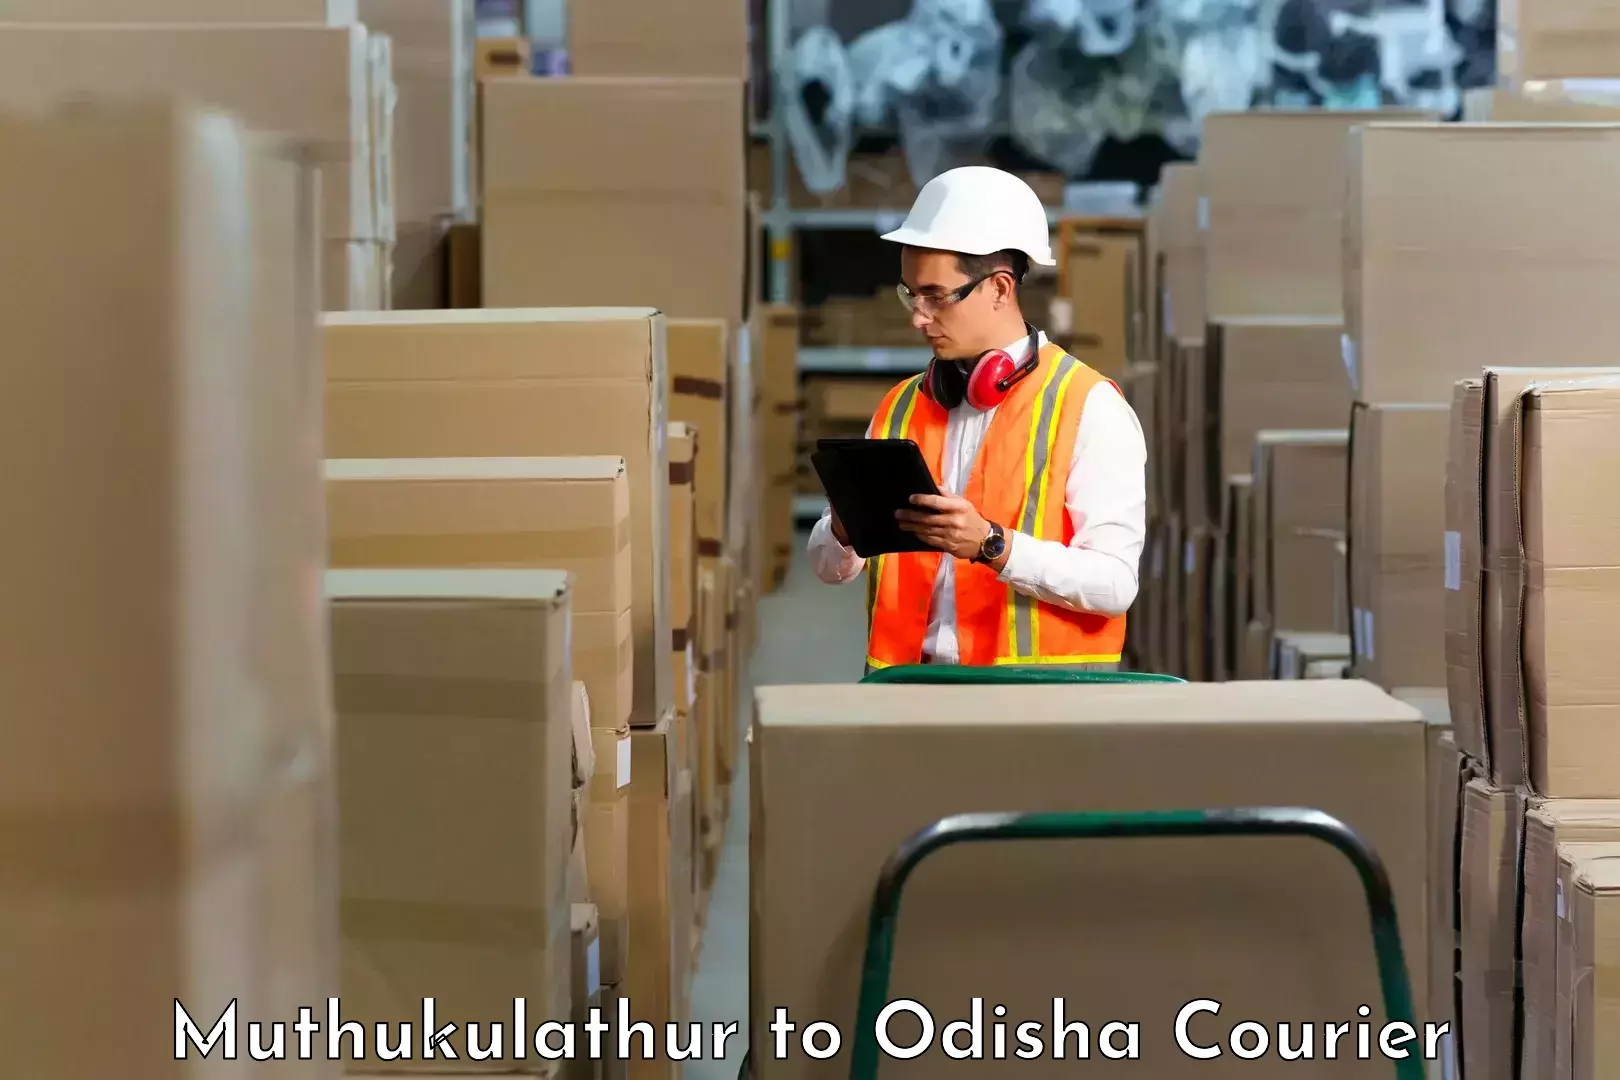 Quality courier services in Muthukulathur to Badamba